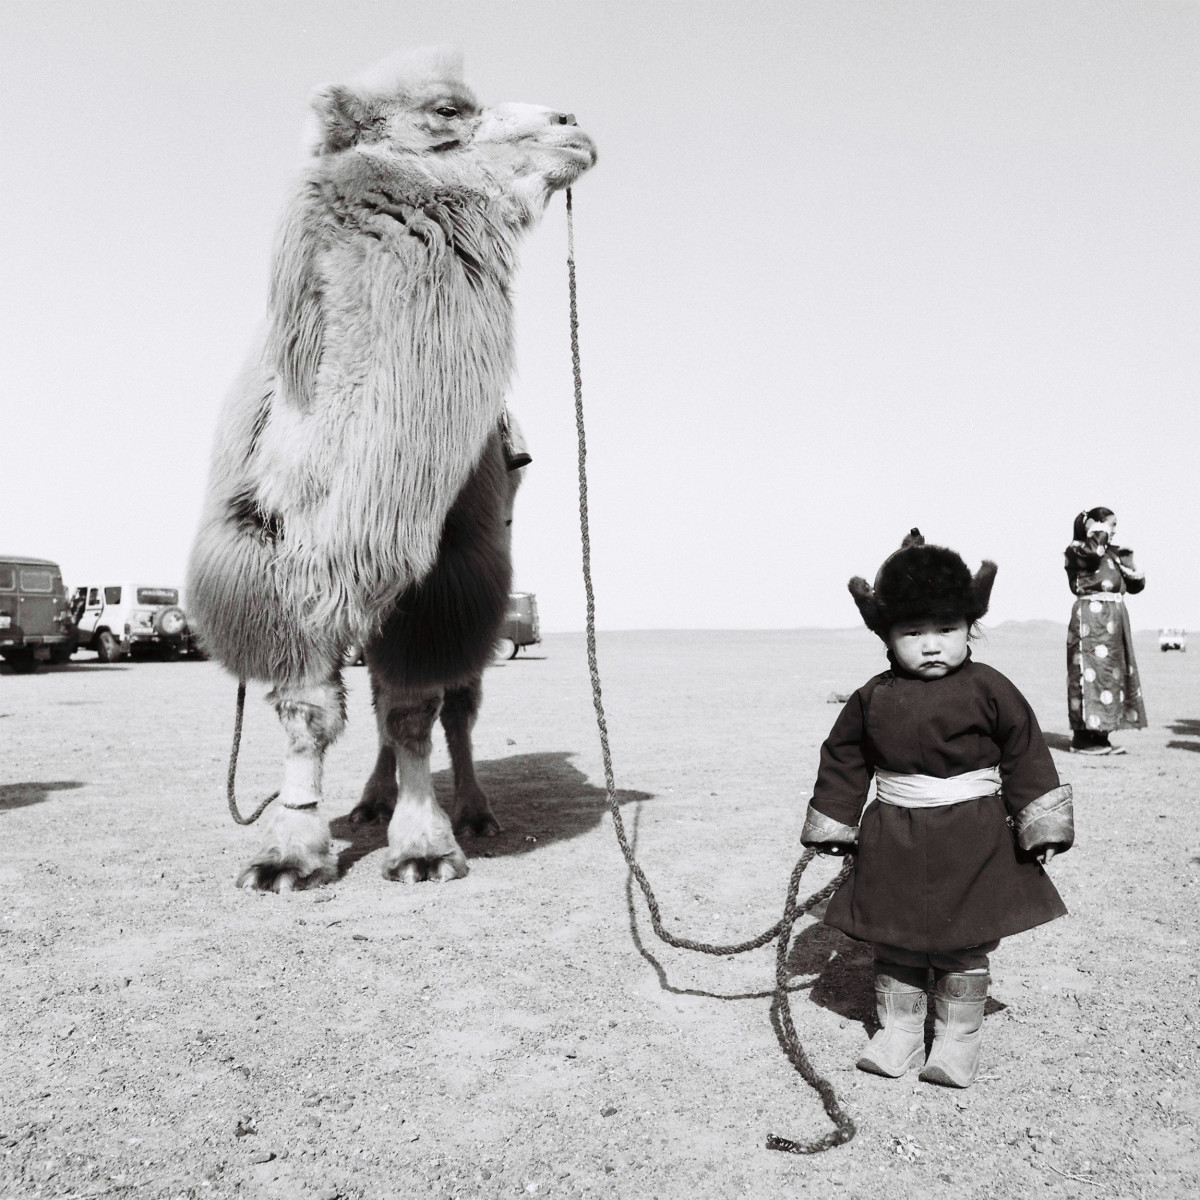 A Mongolian boy with a Bactrian camel, the two-humped animal that lives in Central and East Asia and is shaggier than its desert-dwelling, single-humped counterpart.